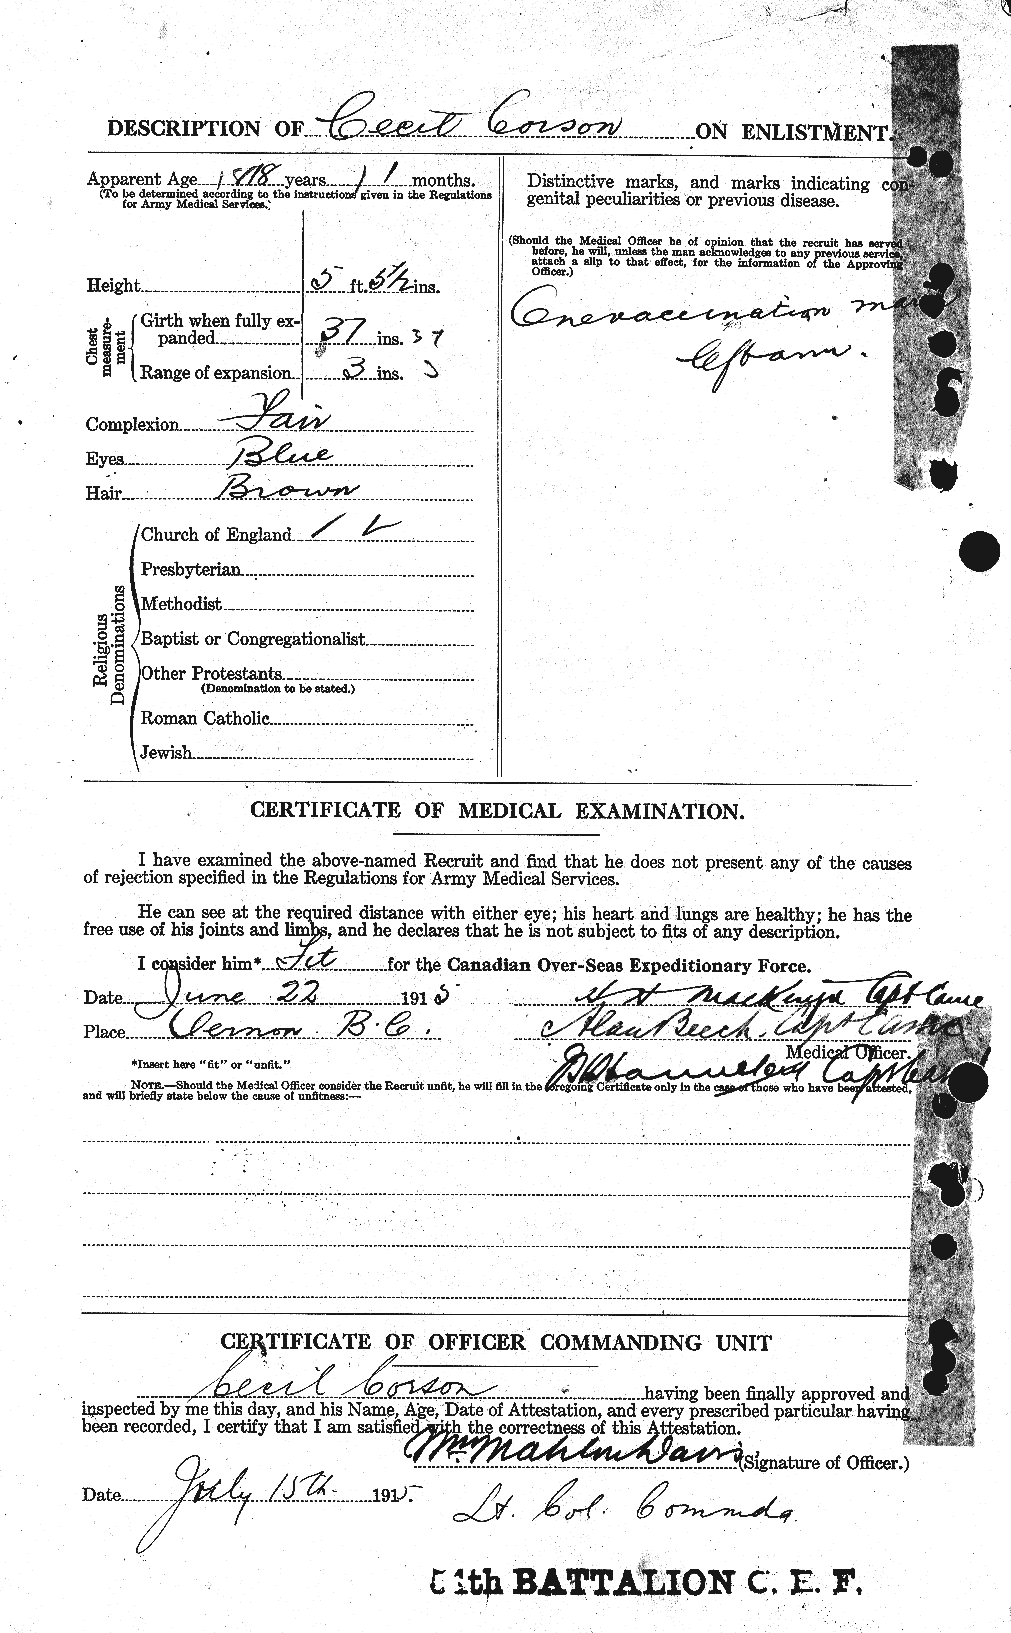 Personnel Records of the First World War - CEF 054207b